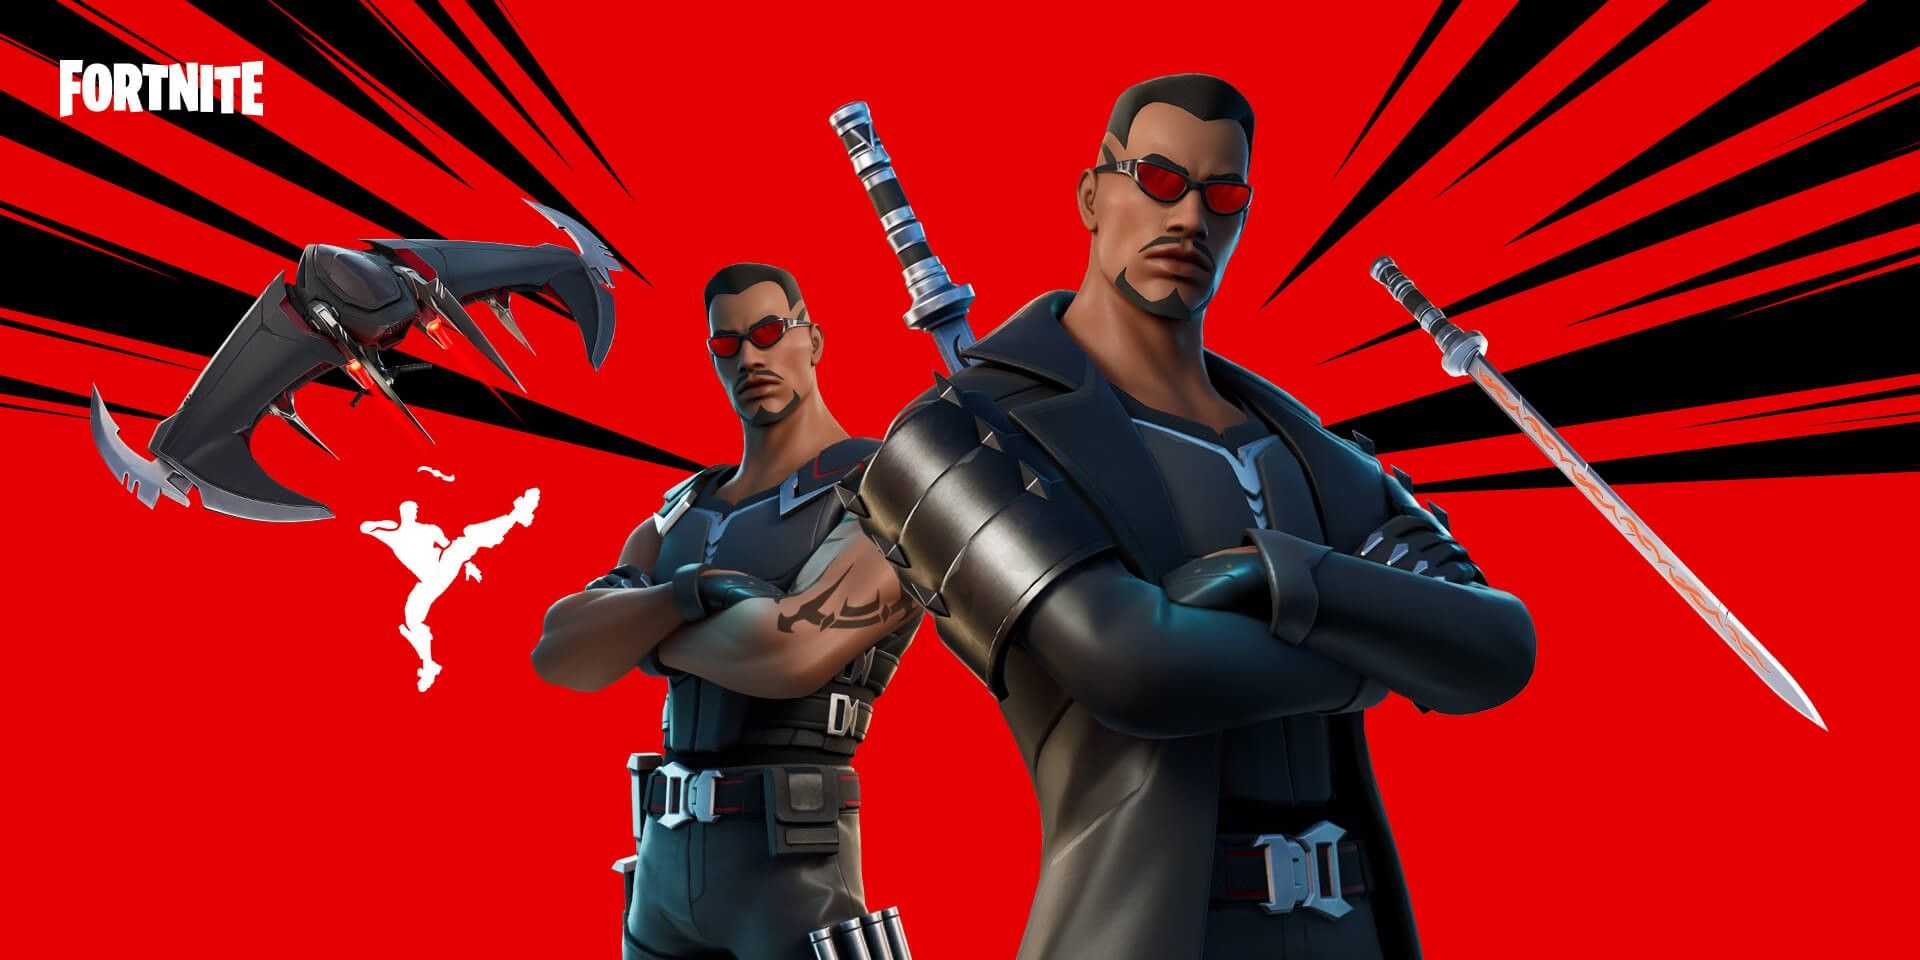 Fortnite Adds Blade To Its Marvel Crossover Season